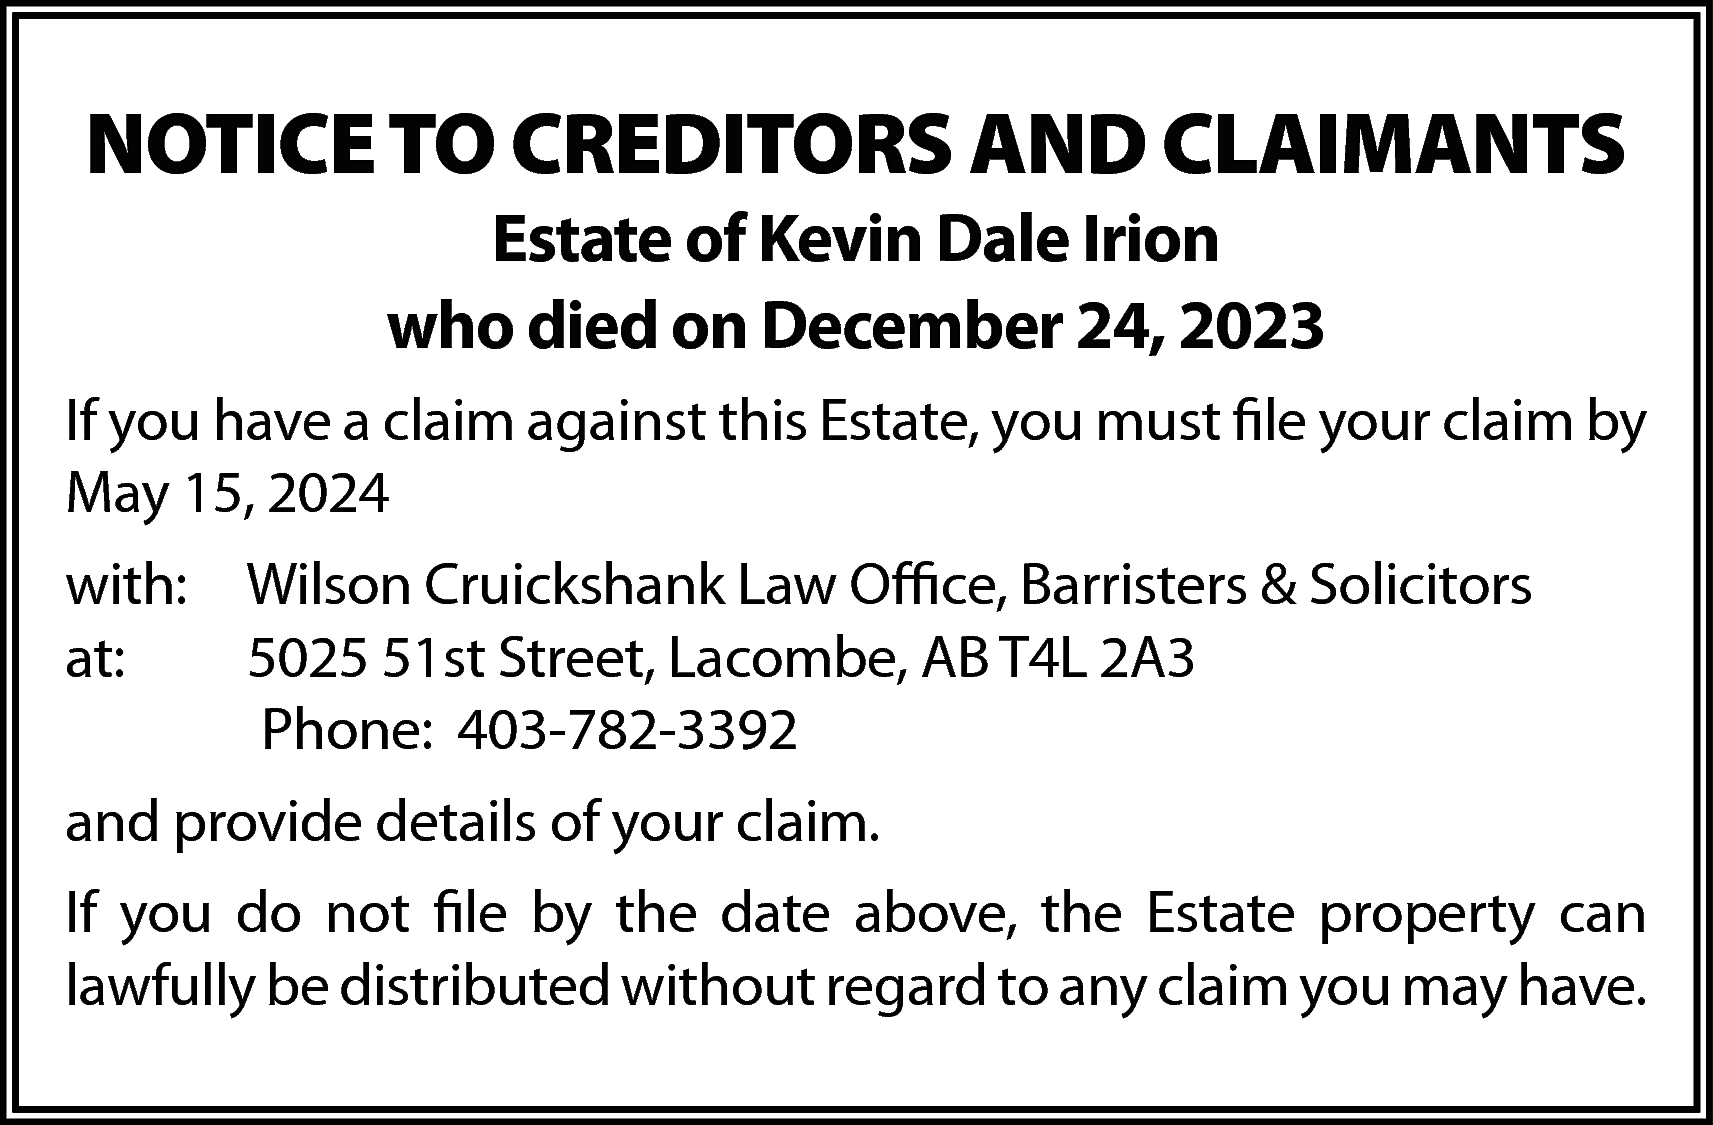 NOTICE TO CREDITORS AND CLAIMANTS  NOTICE TO CREDITORS AND CLAIMANTS  Estate of Kevin Dale Irion  who died on December 24, 2023    If you have a claim against this Estate, you must file your claim by  May 15, 2024  with: Wilson Cruickshank Law Office, Barristers & Solicitors  at:  5025 51st Street, Lacombe, AB T4L 2A3  Phone: 403-782-3392  and provide details of your claim.  If you do not file by the date above, the Estate property can  lawfully be distributed without regard to any claim you may have.    